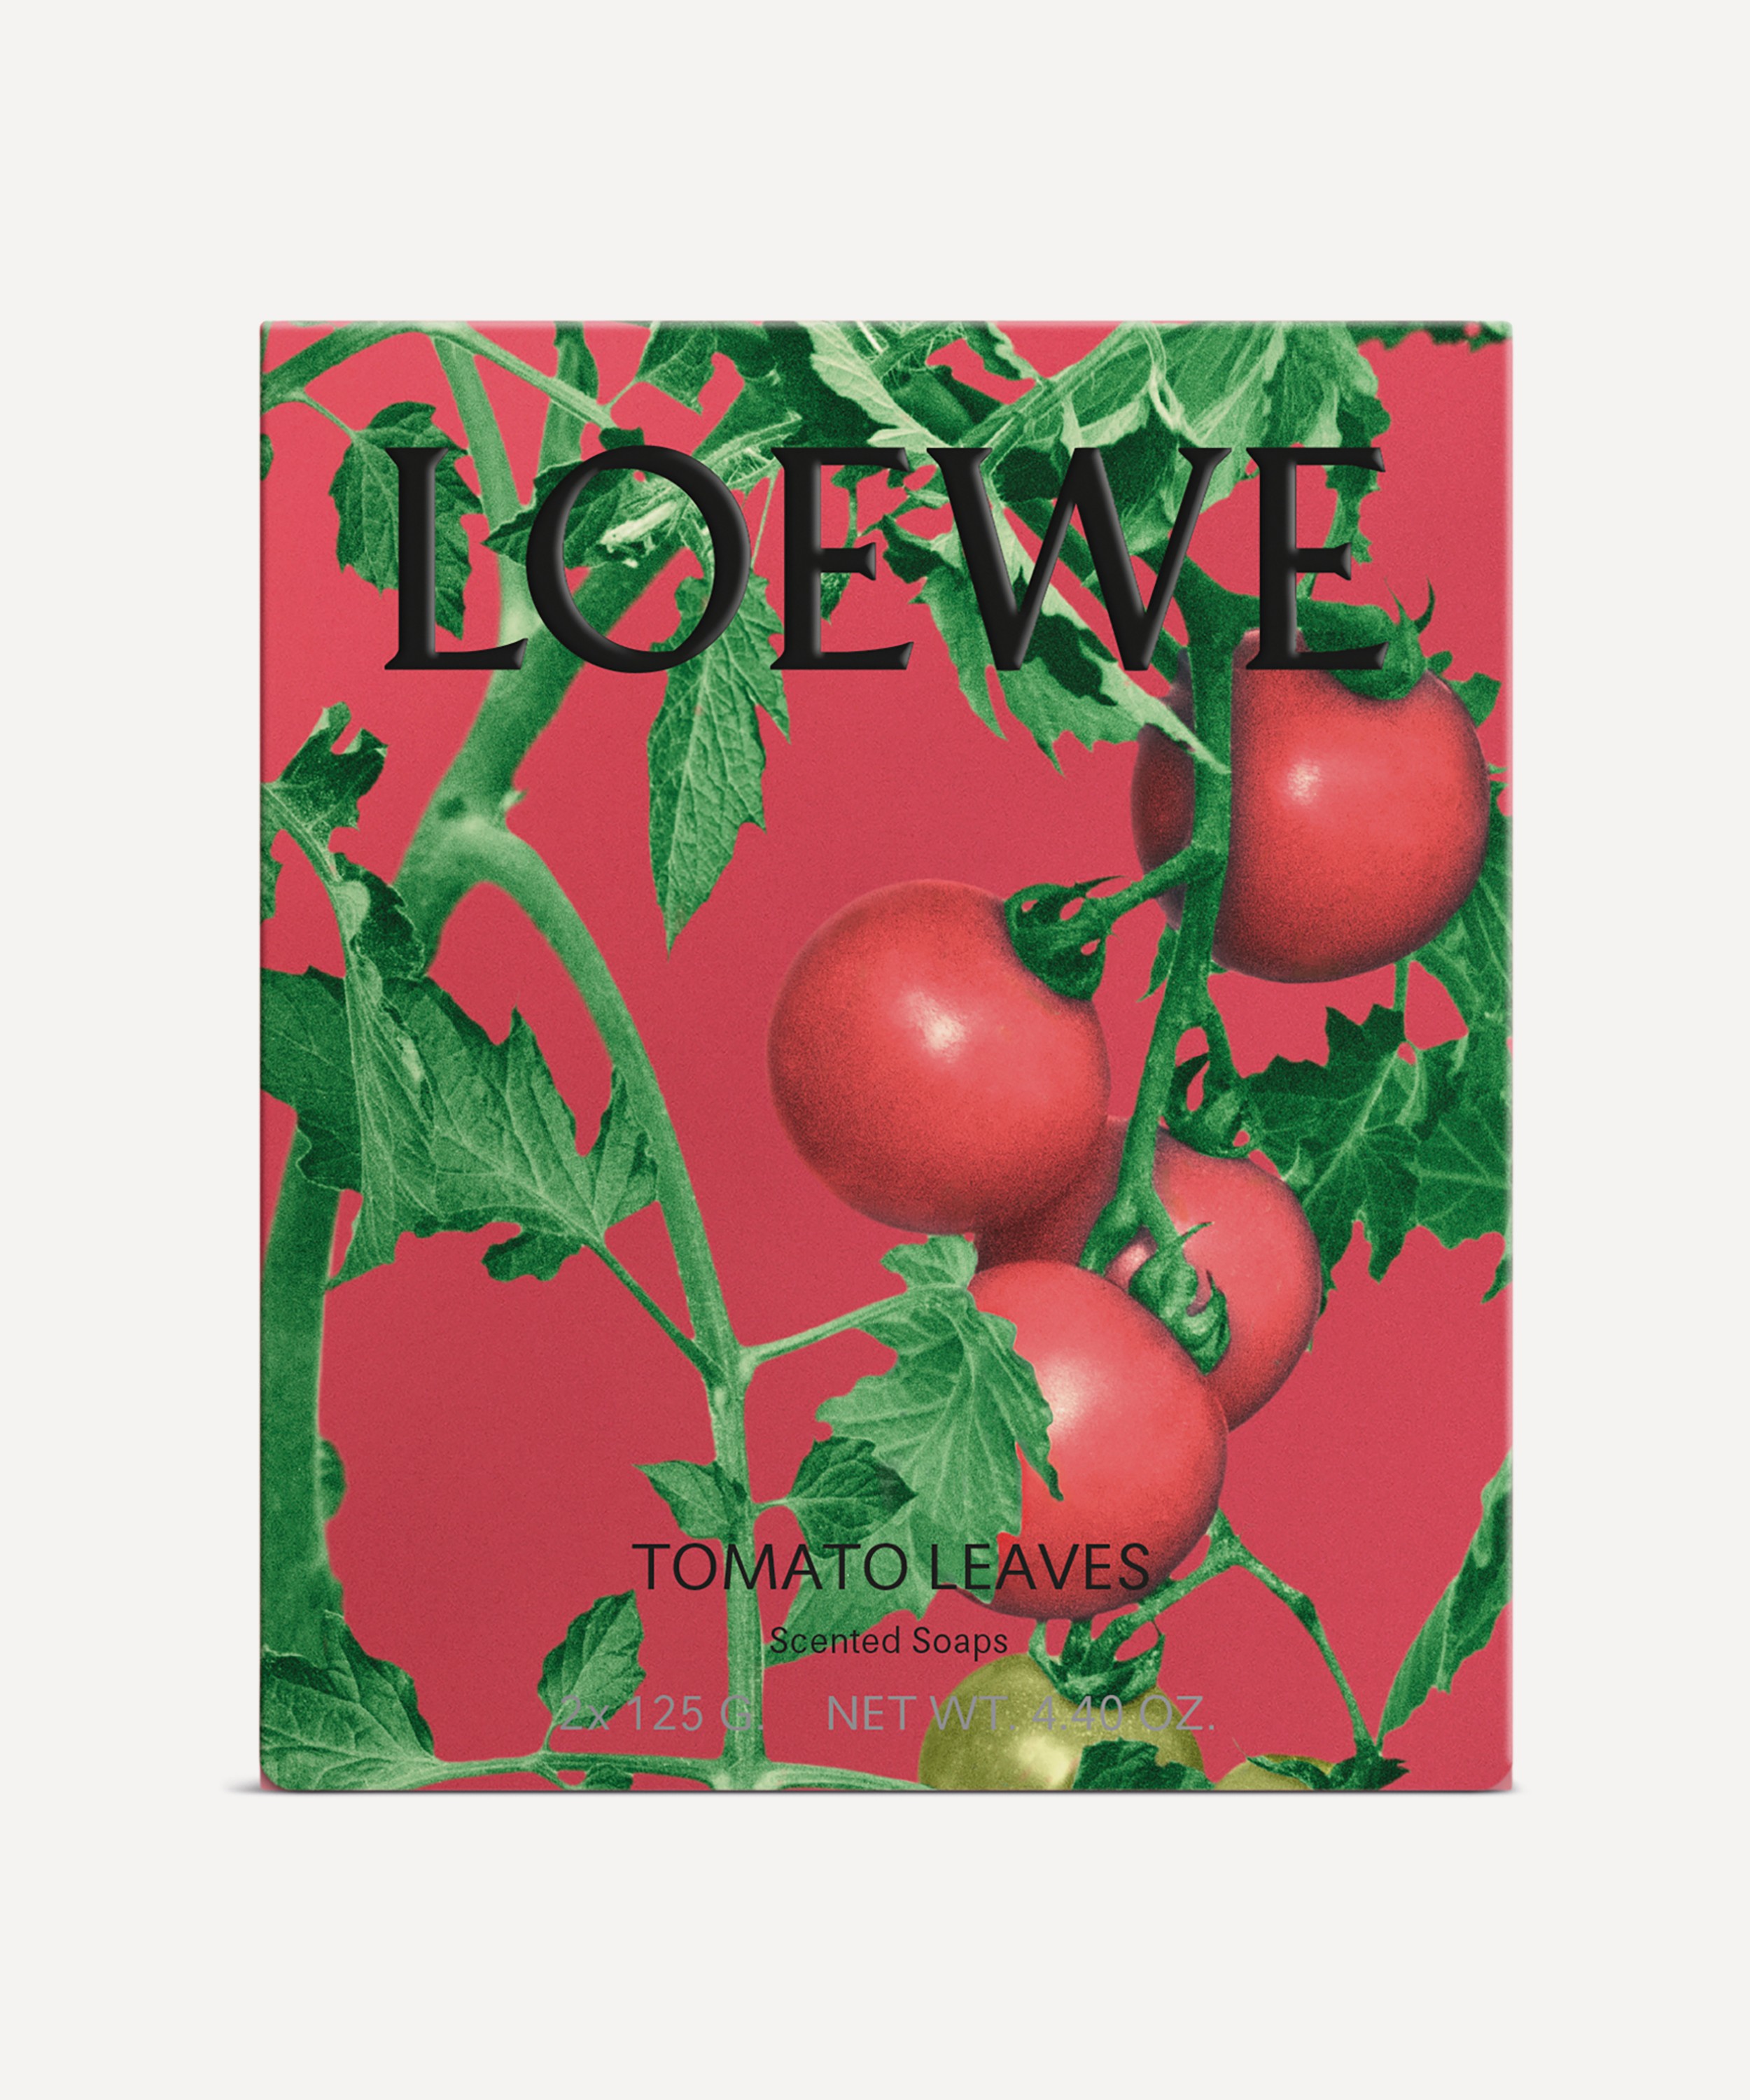 Loewe - Tomato Leaves Small Bar Soap Duo